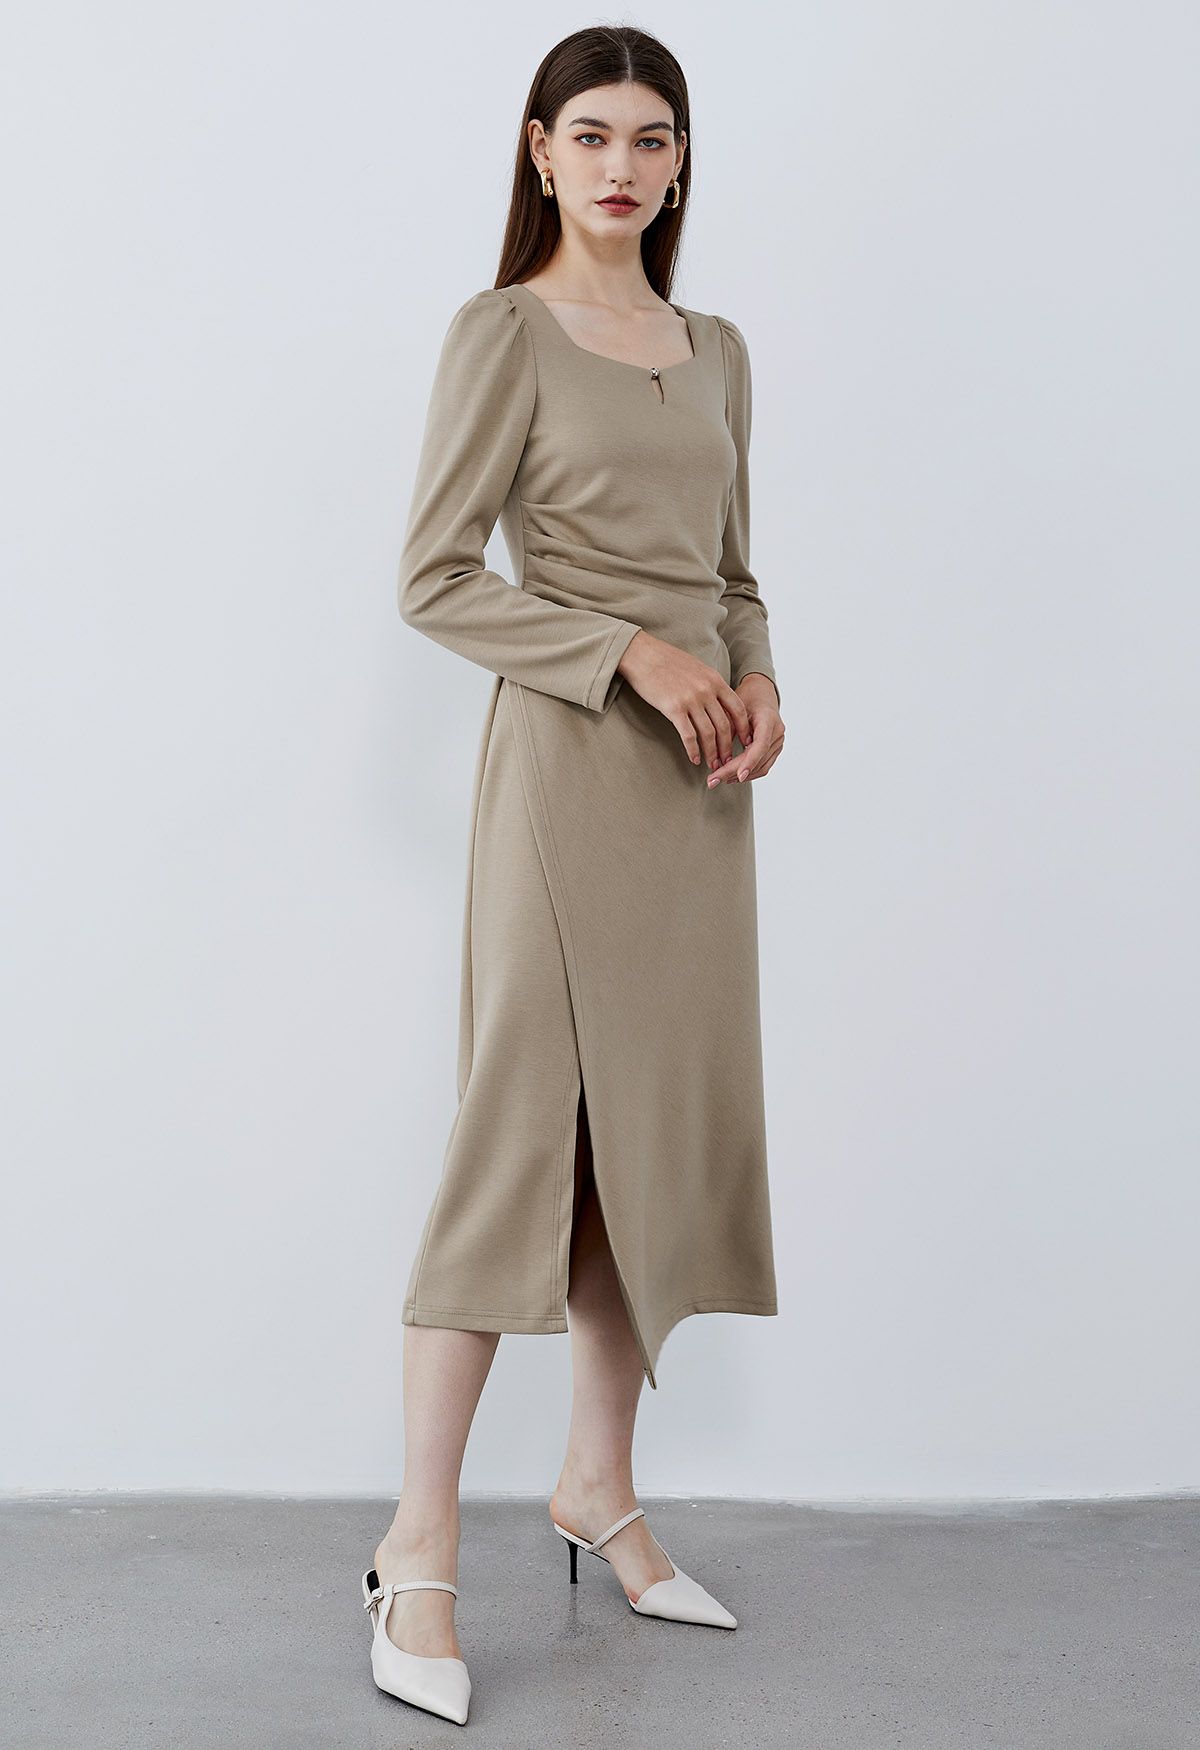 Square Neck Ruched Waist Flap Midi Dress in Tan